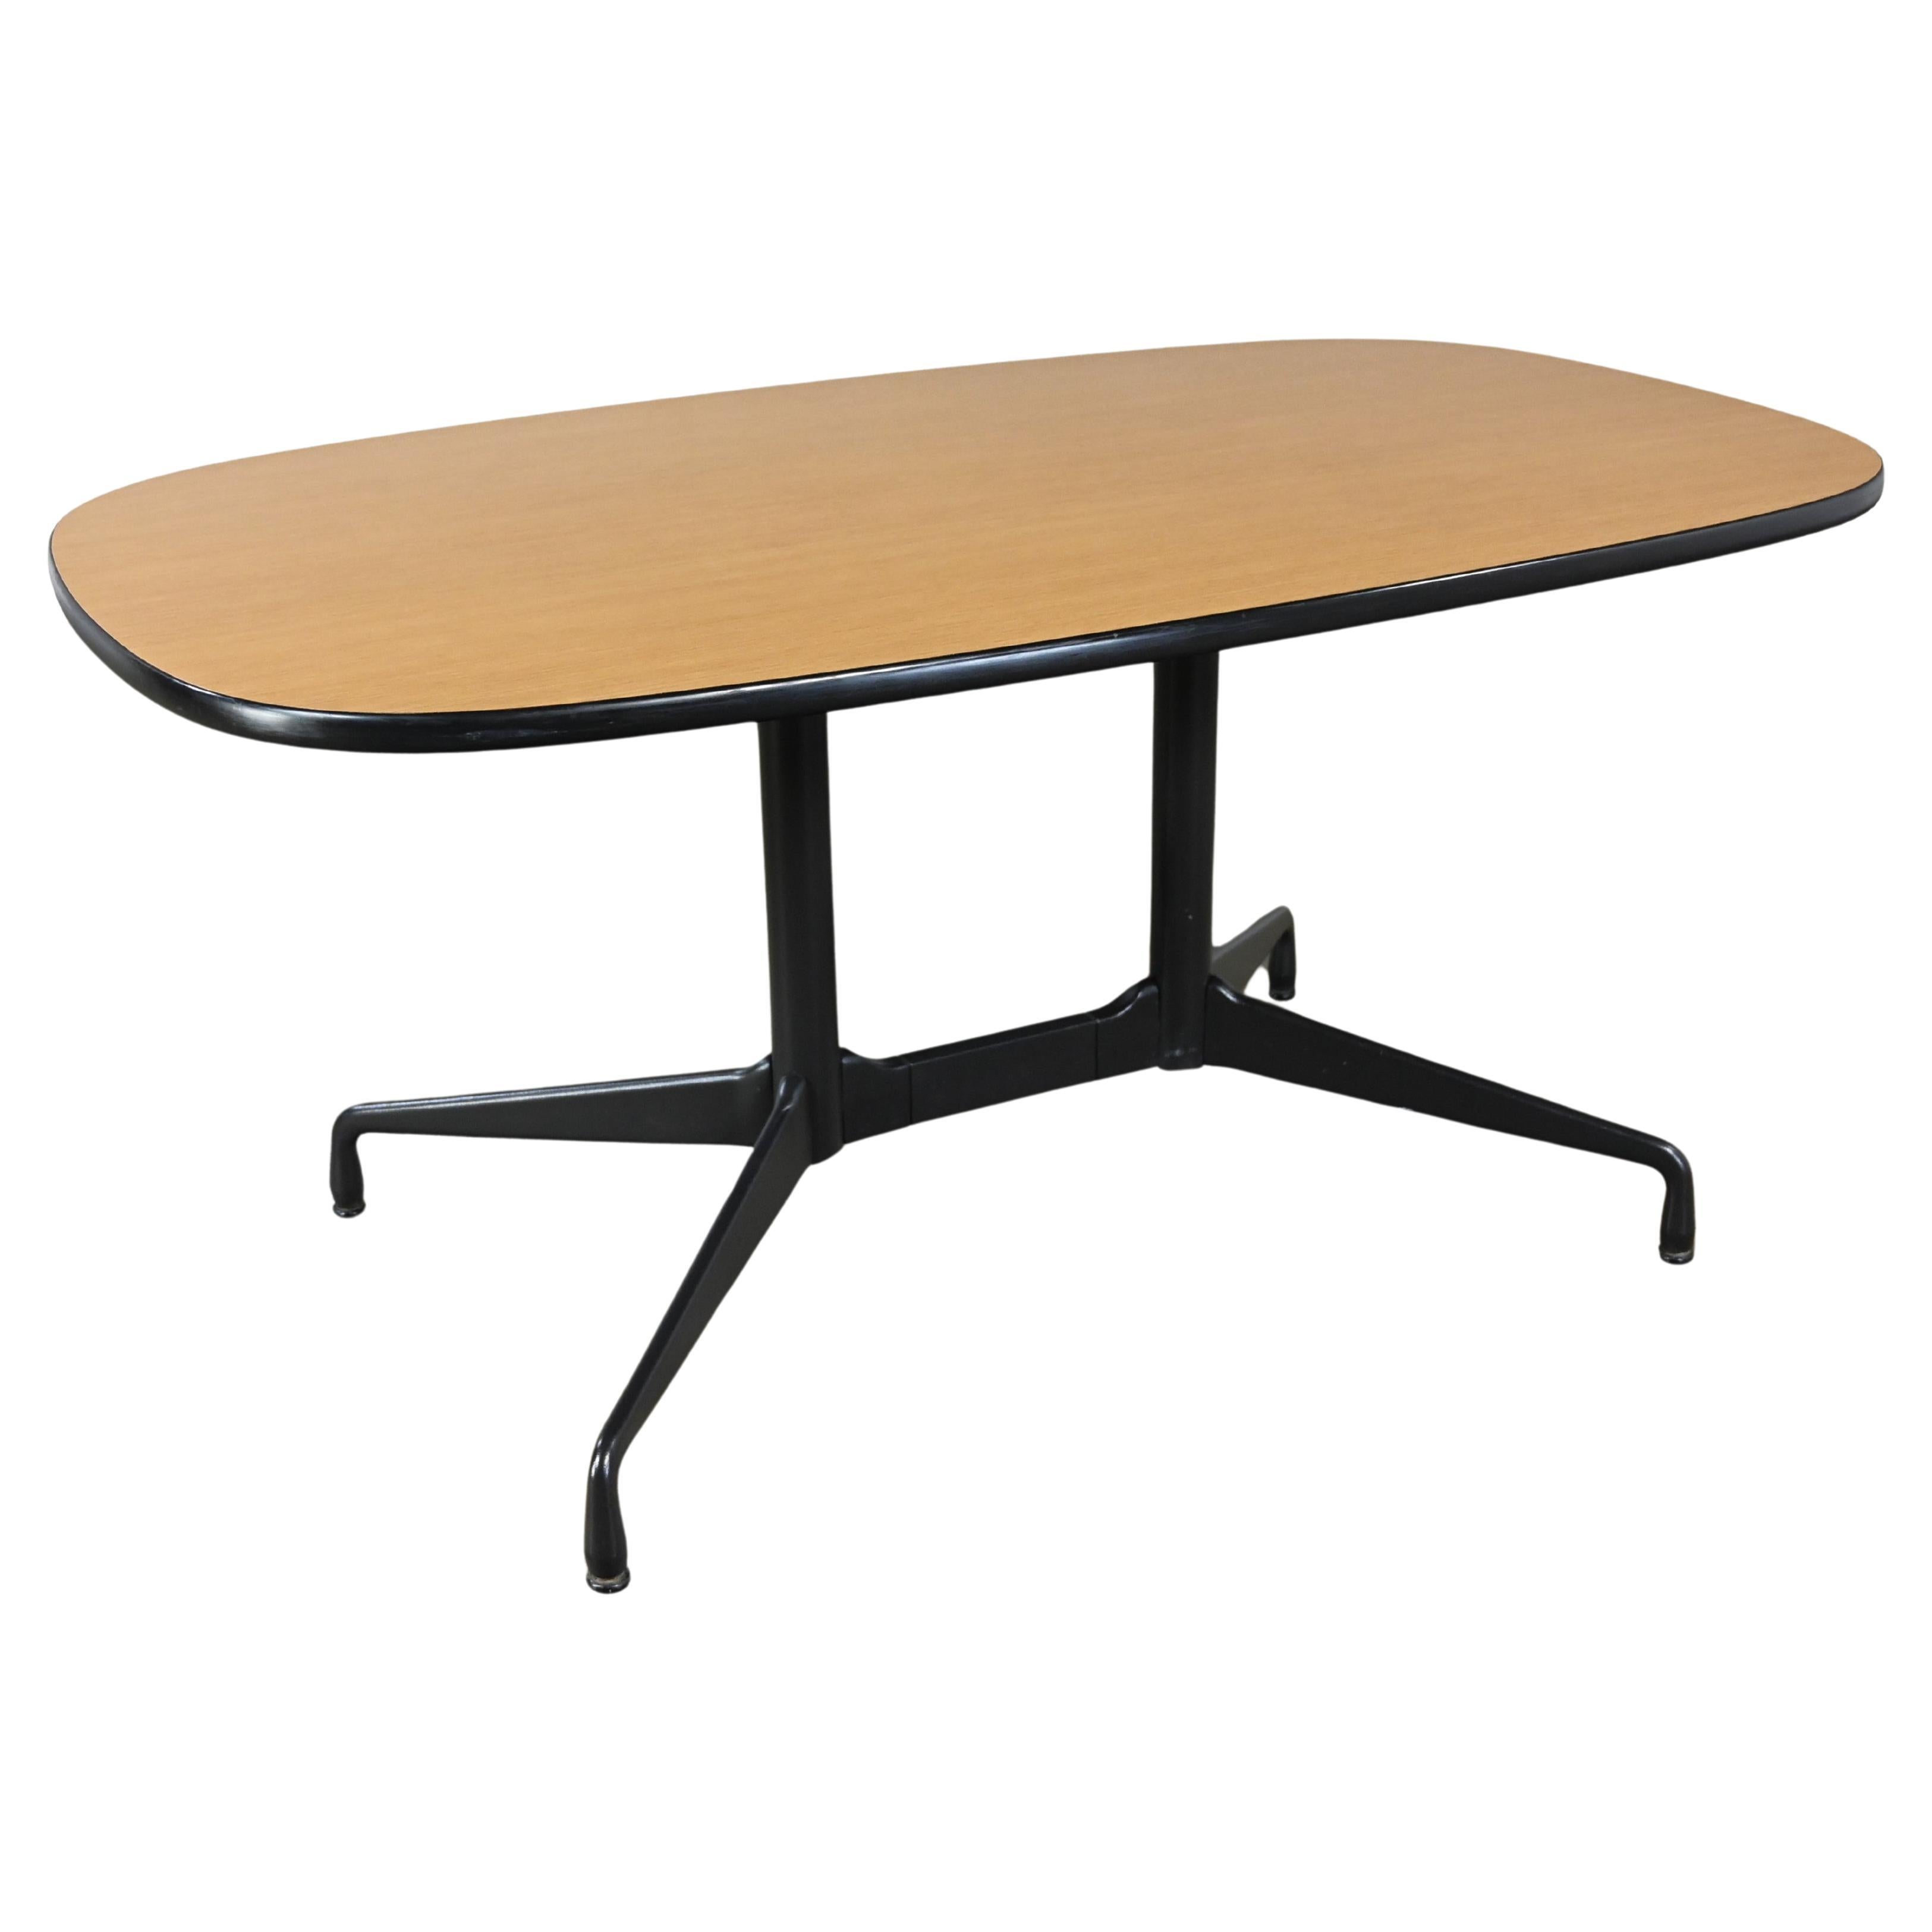 Eames Herman Miller Oval Conference Dining Table Universal Segmented Laminate #2 For Sale